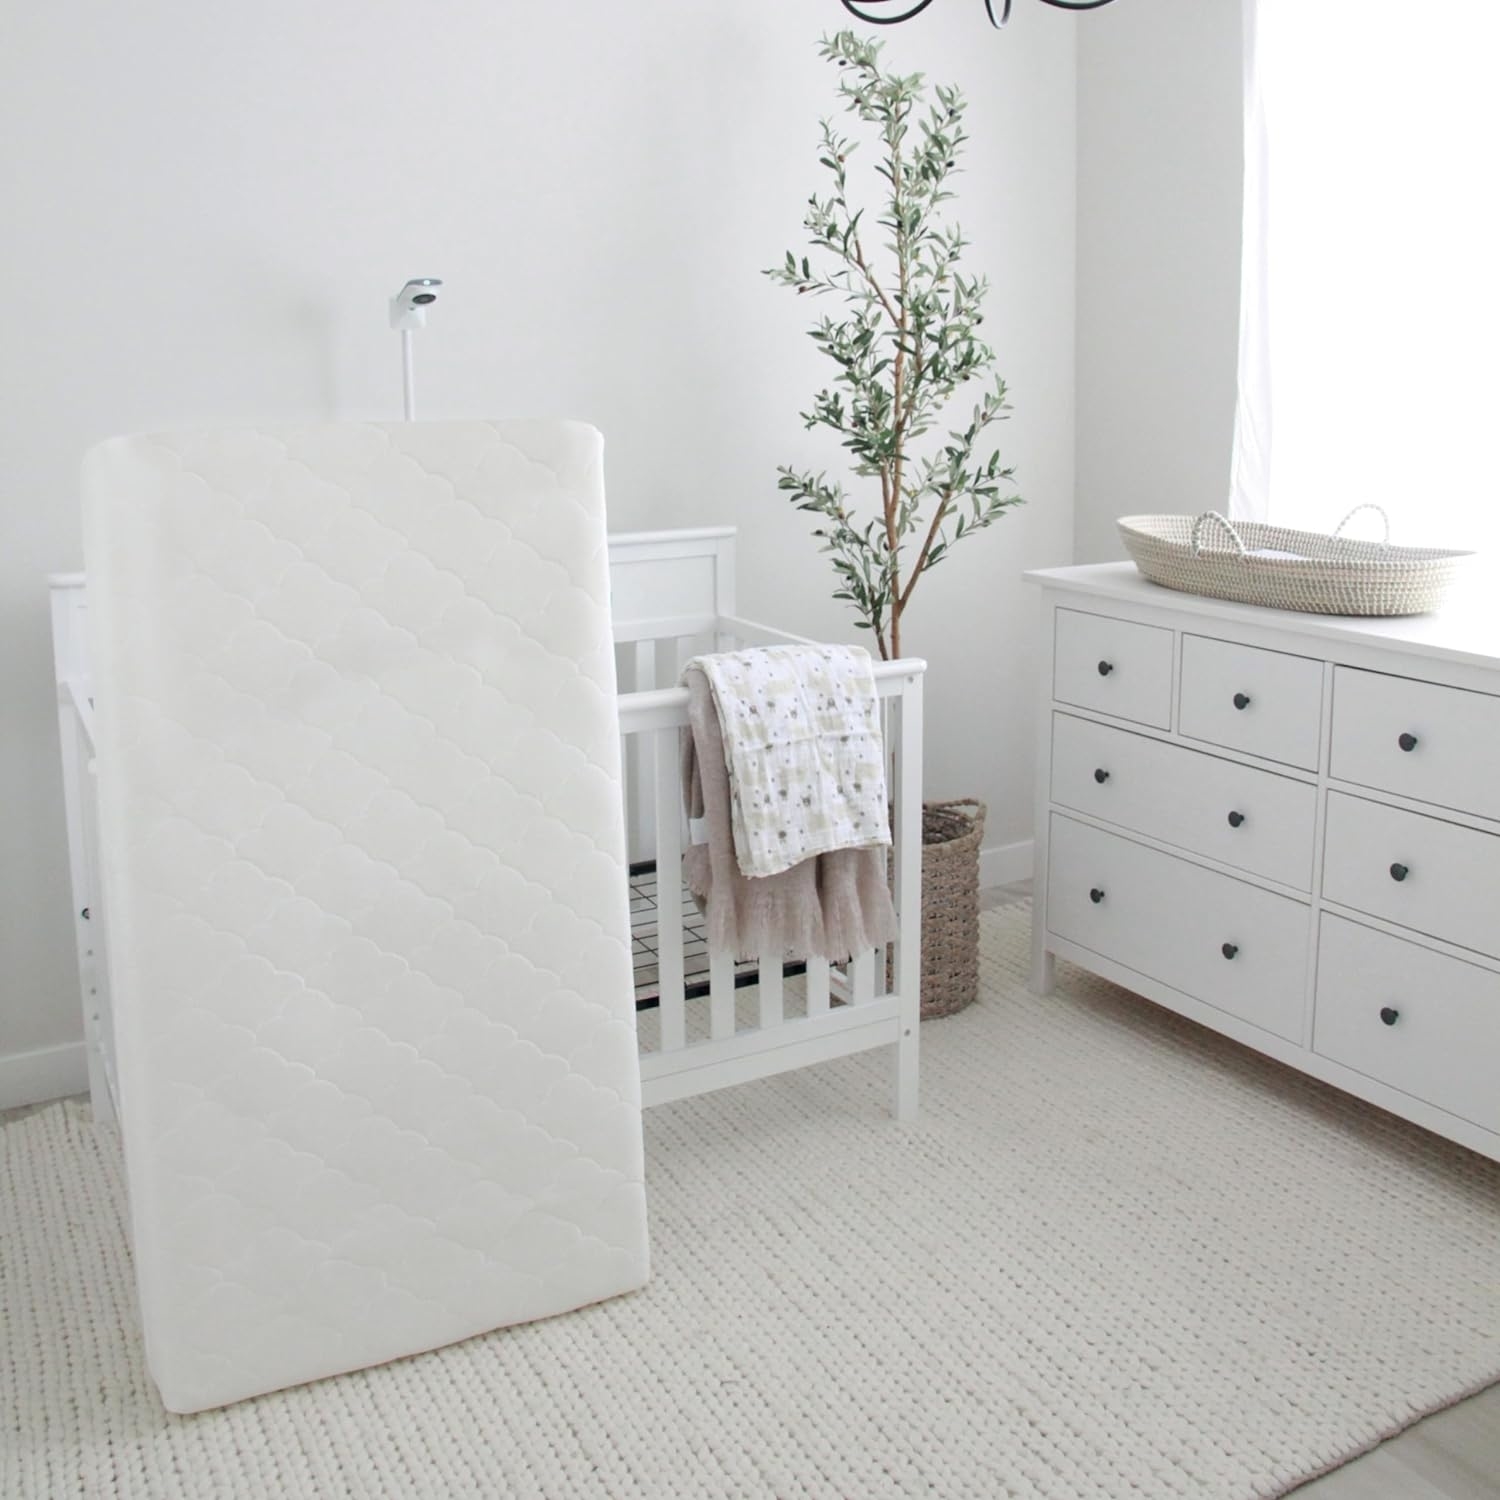 A crib mattress leaning against a wall next to a white crib and dresser in a nursery